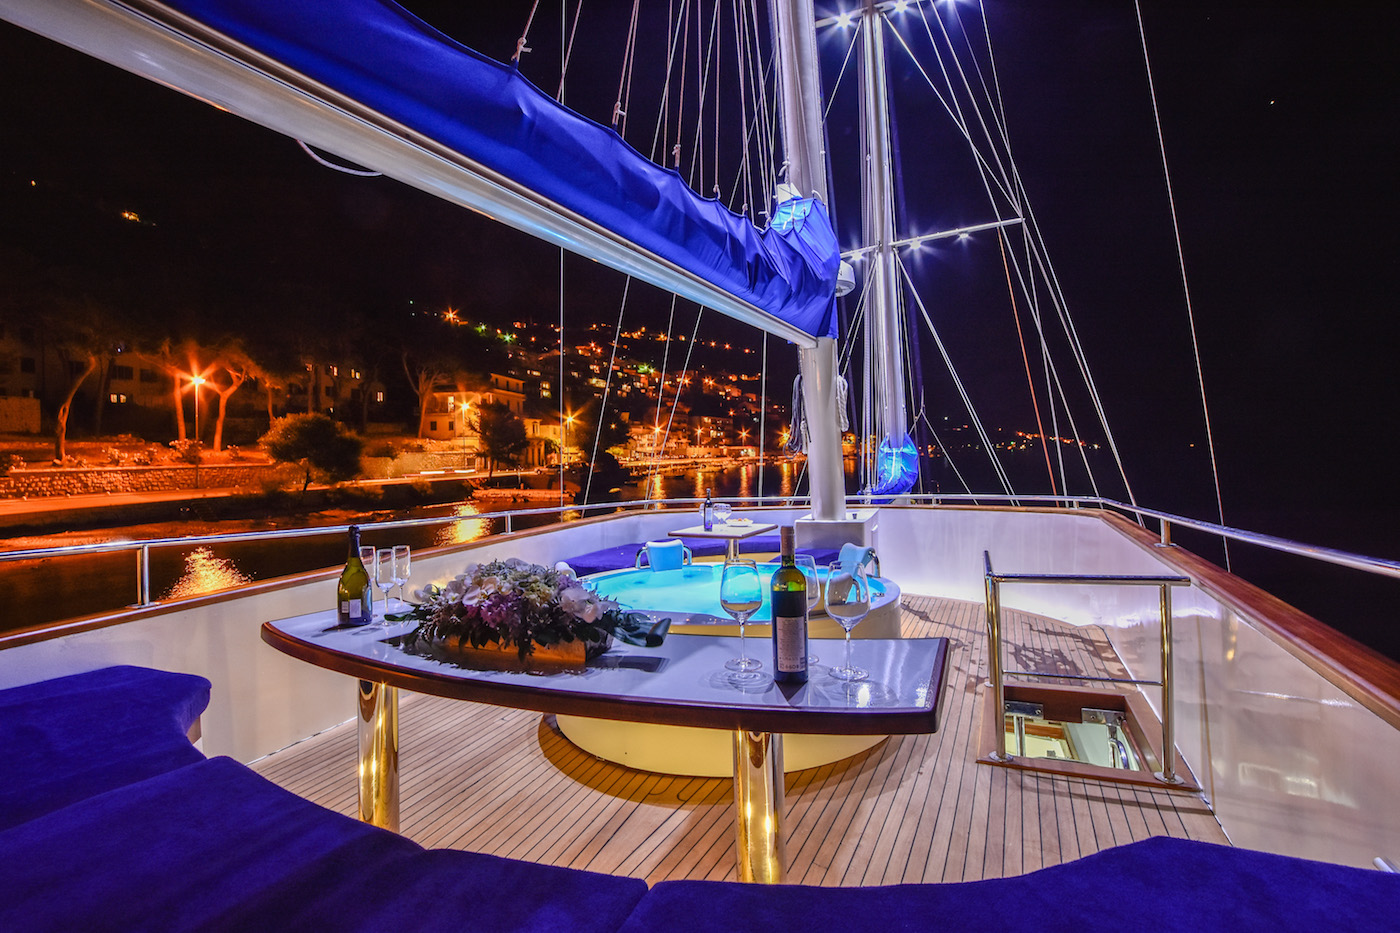 On Deck Jacuzzi By Night